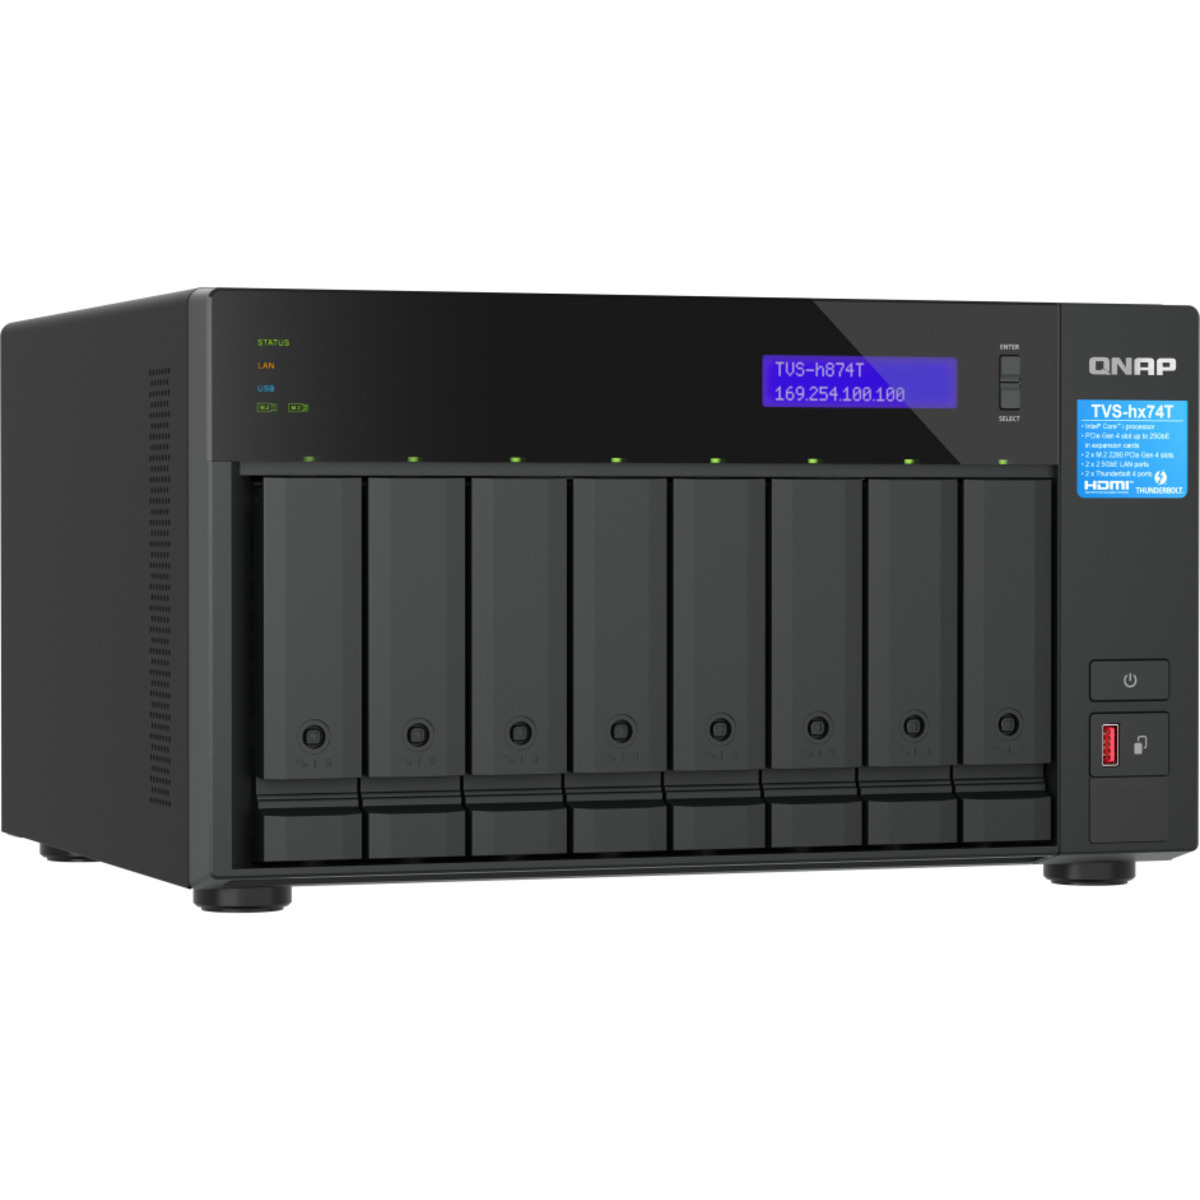 QNAP TVS-h874T Core i9 Thunderbolt 4 154tb 8-Bay Desktop Multimedia / Power User / Business DAS-NAS - Combo Direct + Network Storage Device 7x22tb Western Digital Ultrastar HC580 SED WUH722422ALE6L1 3.5 7200rpm SATA 6Gb/s HDD ENTERPRISE Class Drives Installed - Burn-In Tested TVS-h874T Core i9 Thunderbolt 4